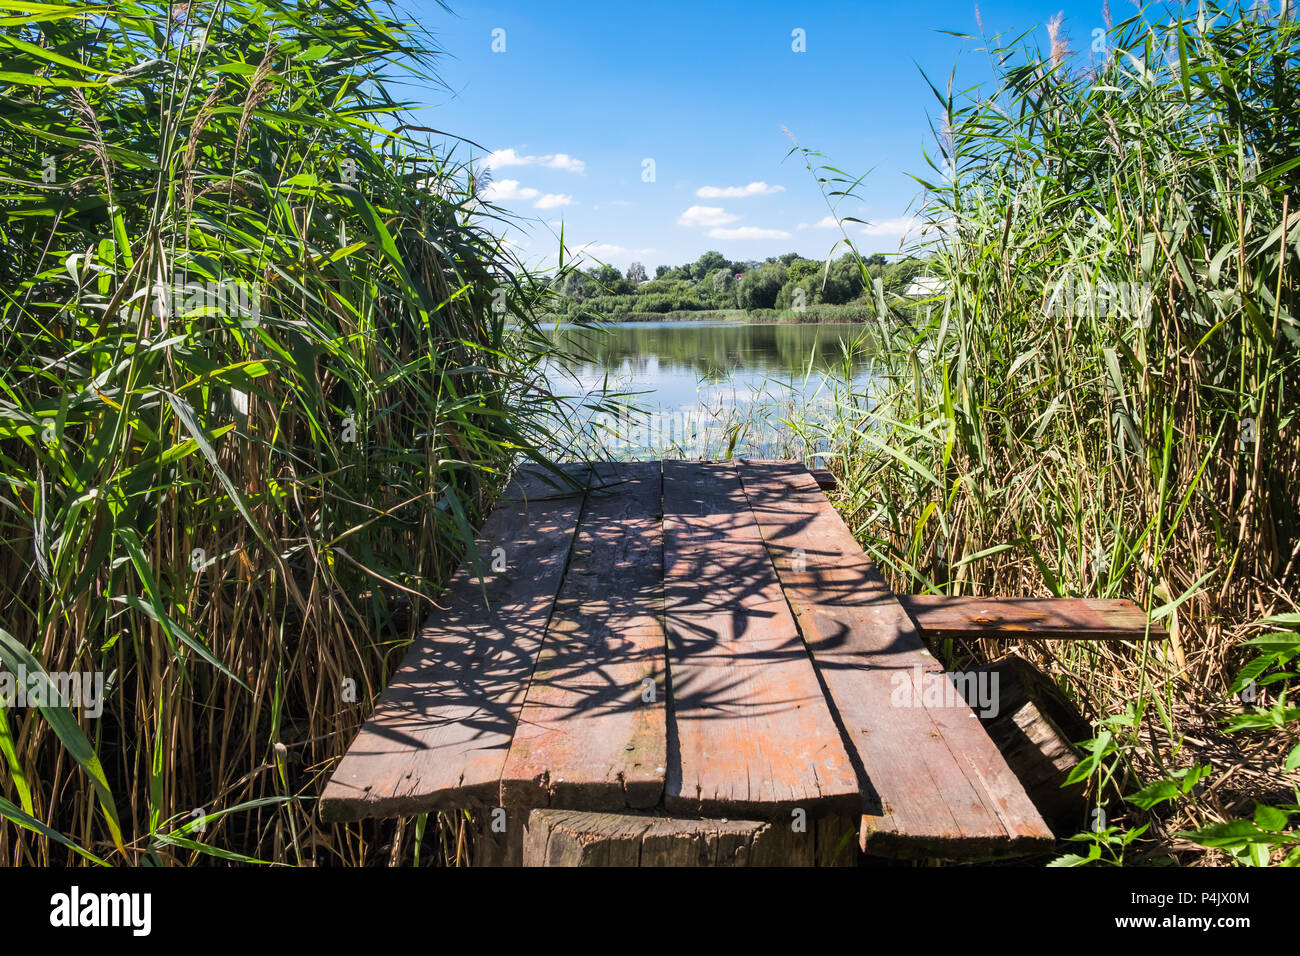 Old wooden bridge over the rural lake. Wild reeds on the lake edge. Small country houses among trees on distant side. Sunny summer day. Stock Photo